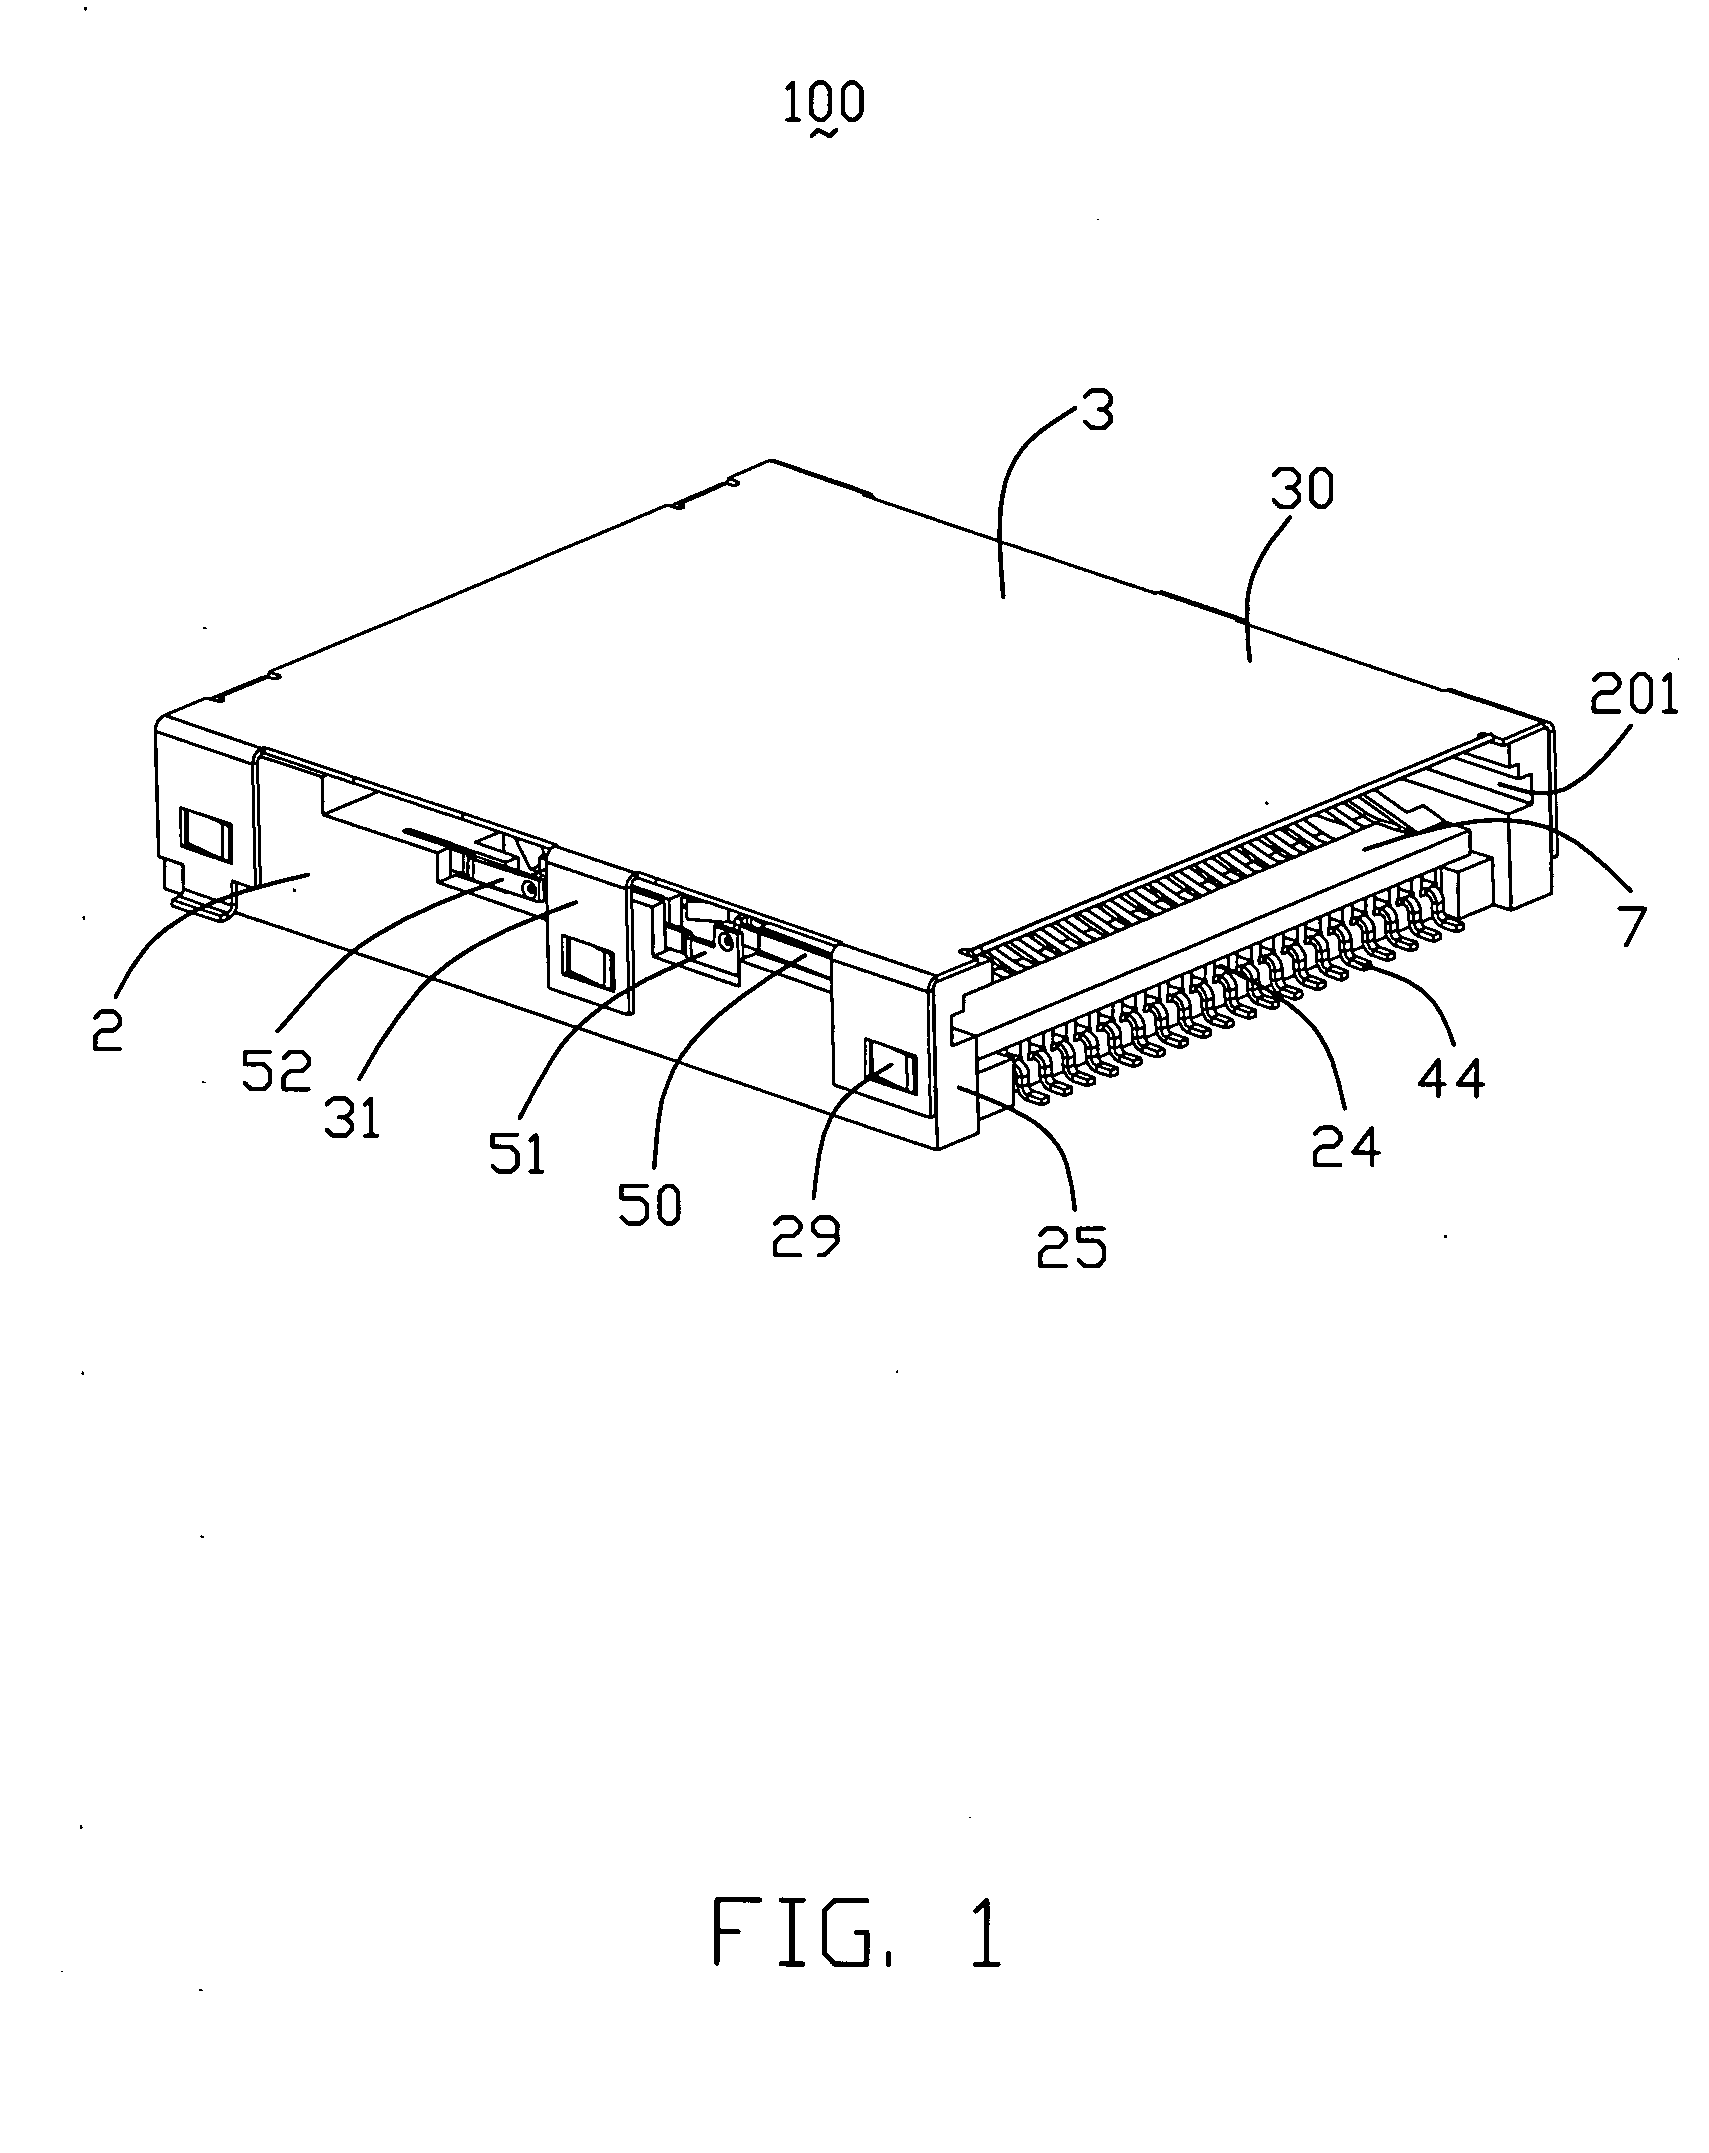 Electrical card connector with improved card restriction structure